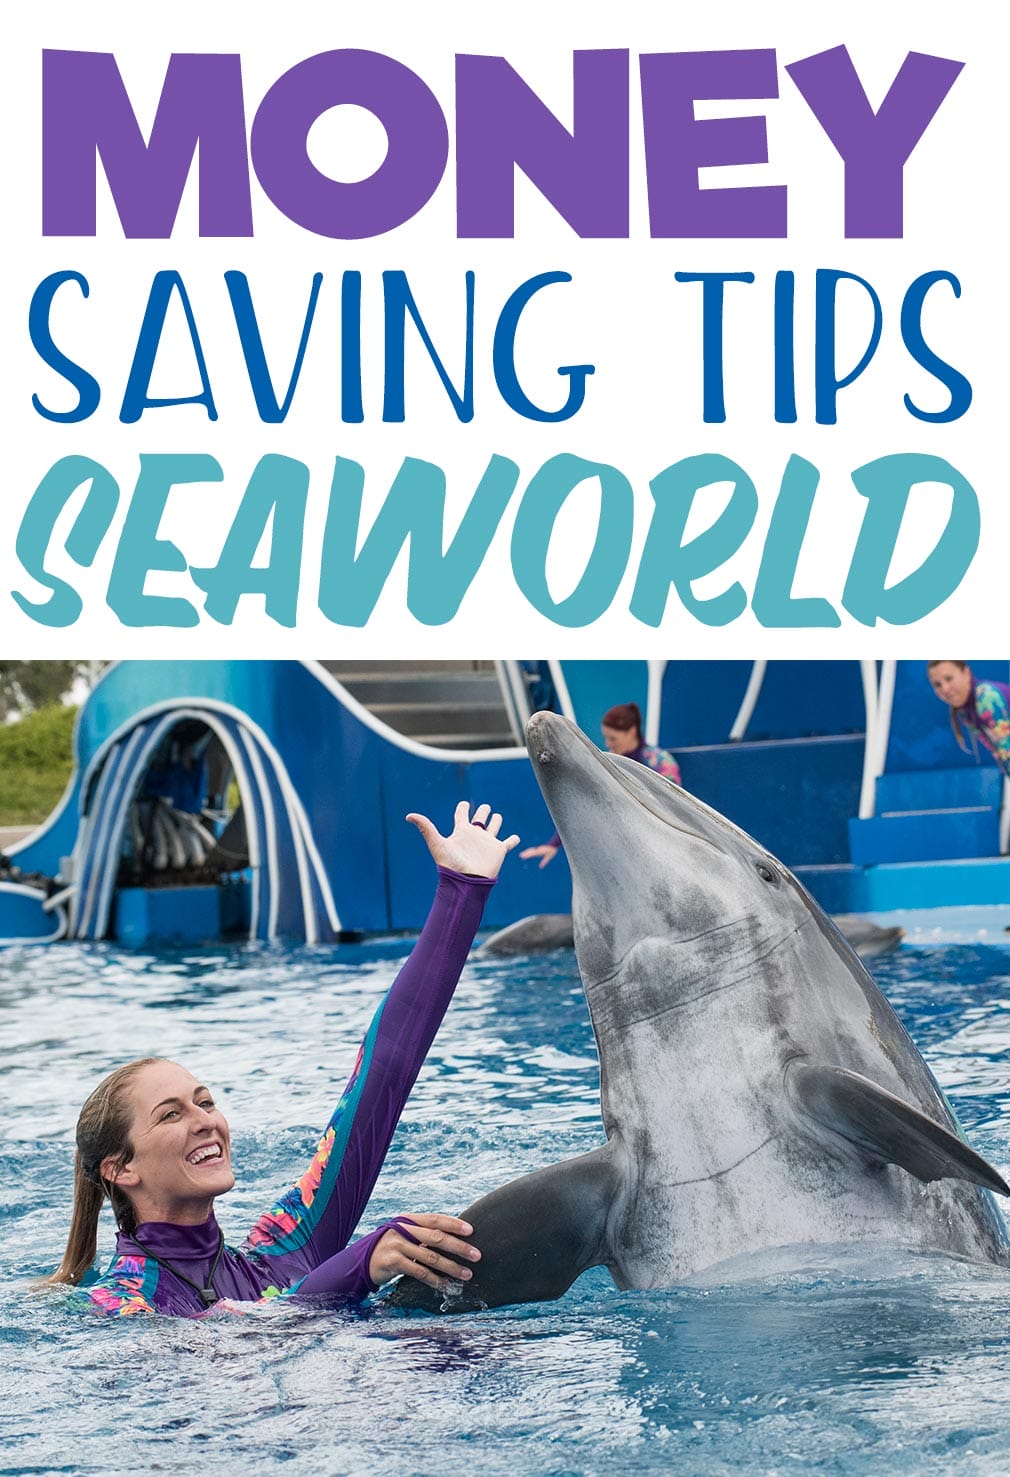 Money Saving Tips for SeaWorld - Tips for a fun family vacation in San Diego